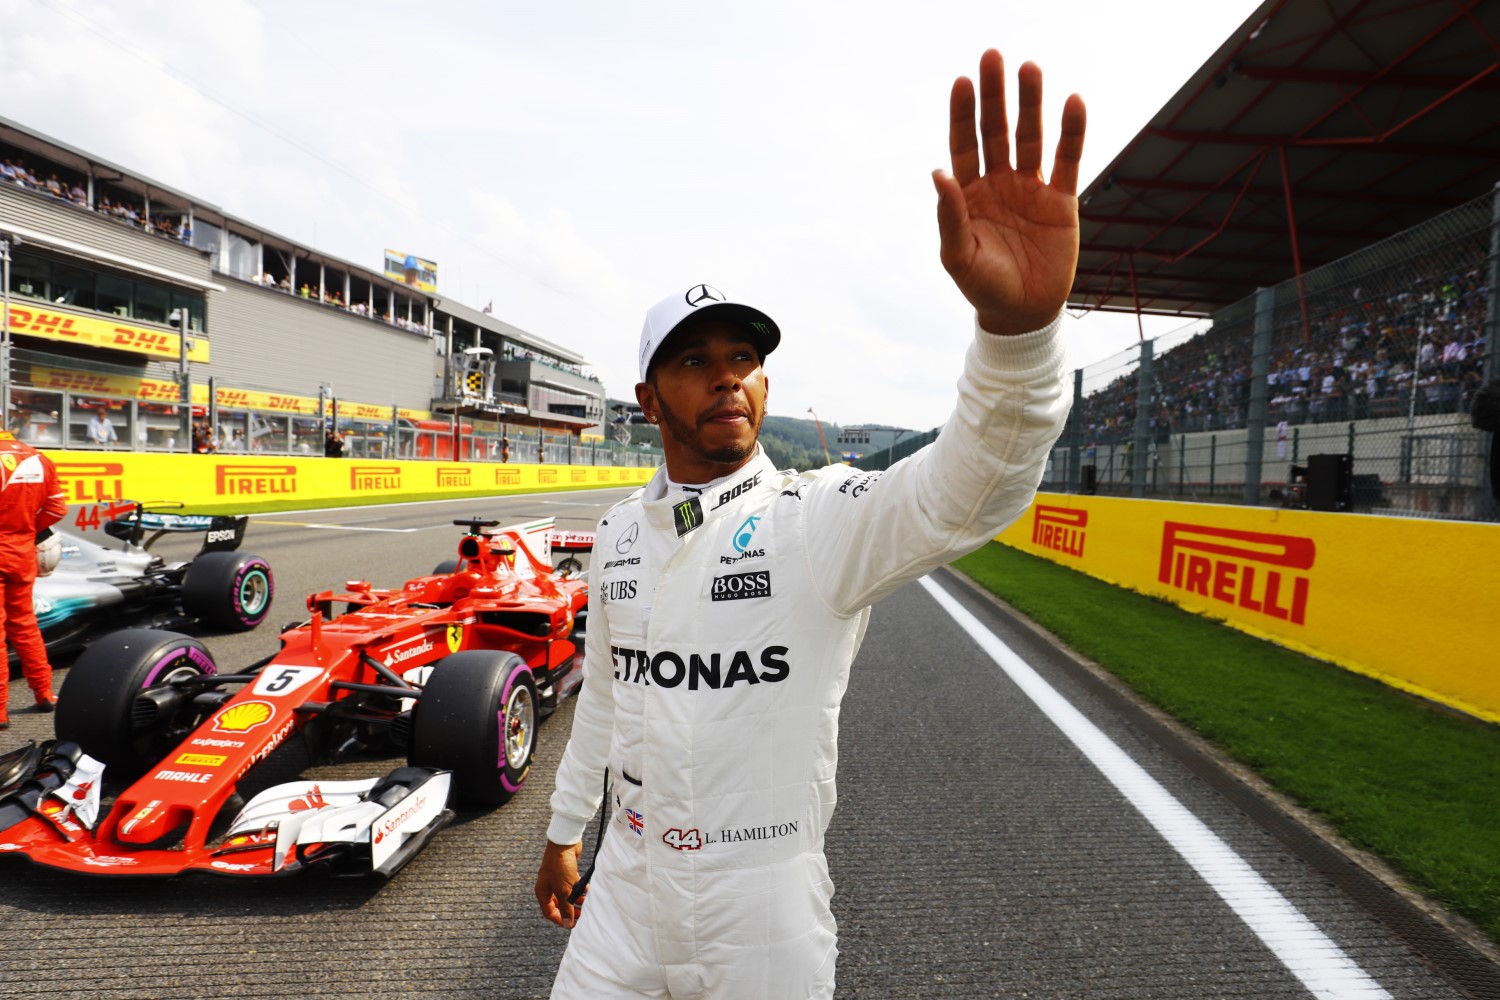 Hamilton equals and will soon break the record of another Aldo Costa car driver - Michael Schumacher